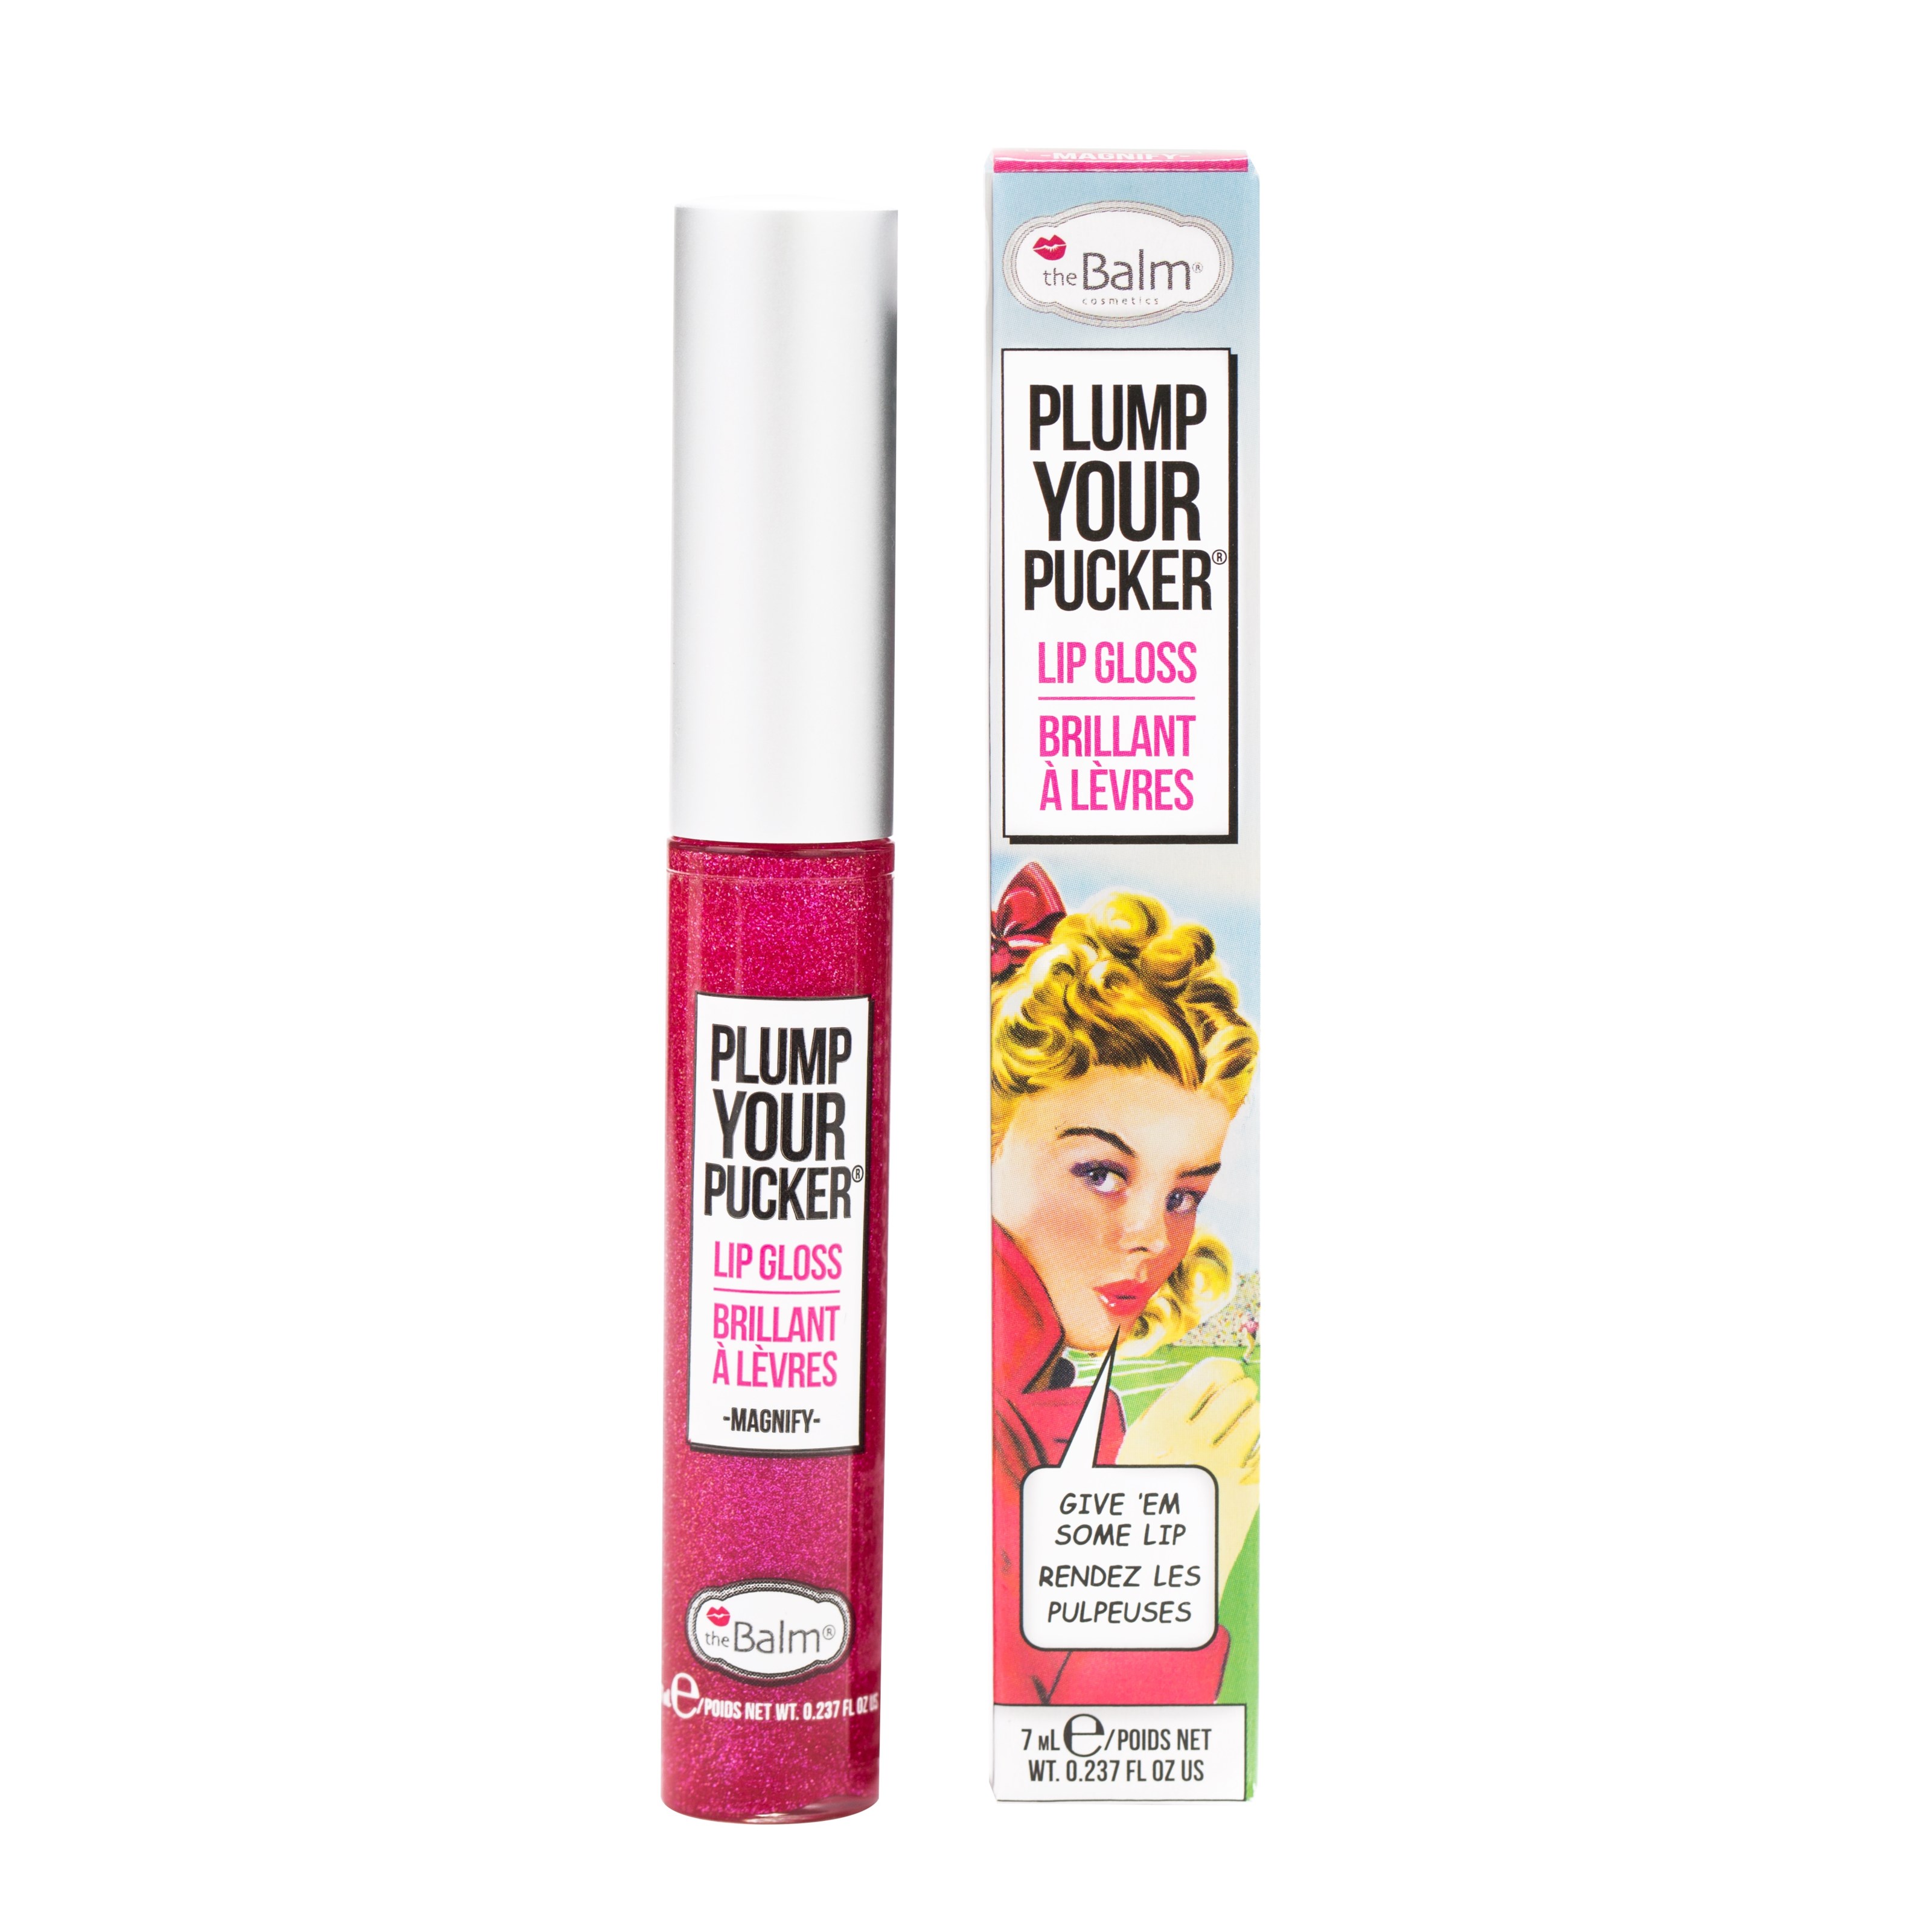 the Balm Plump Your Pucker Pucker Magnify